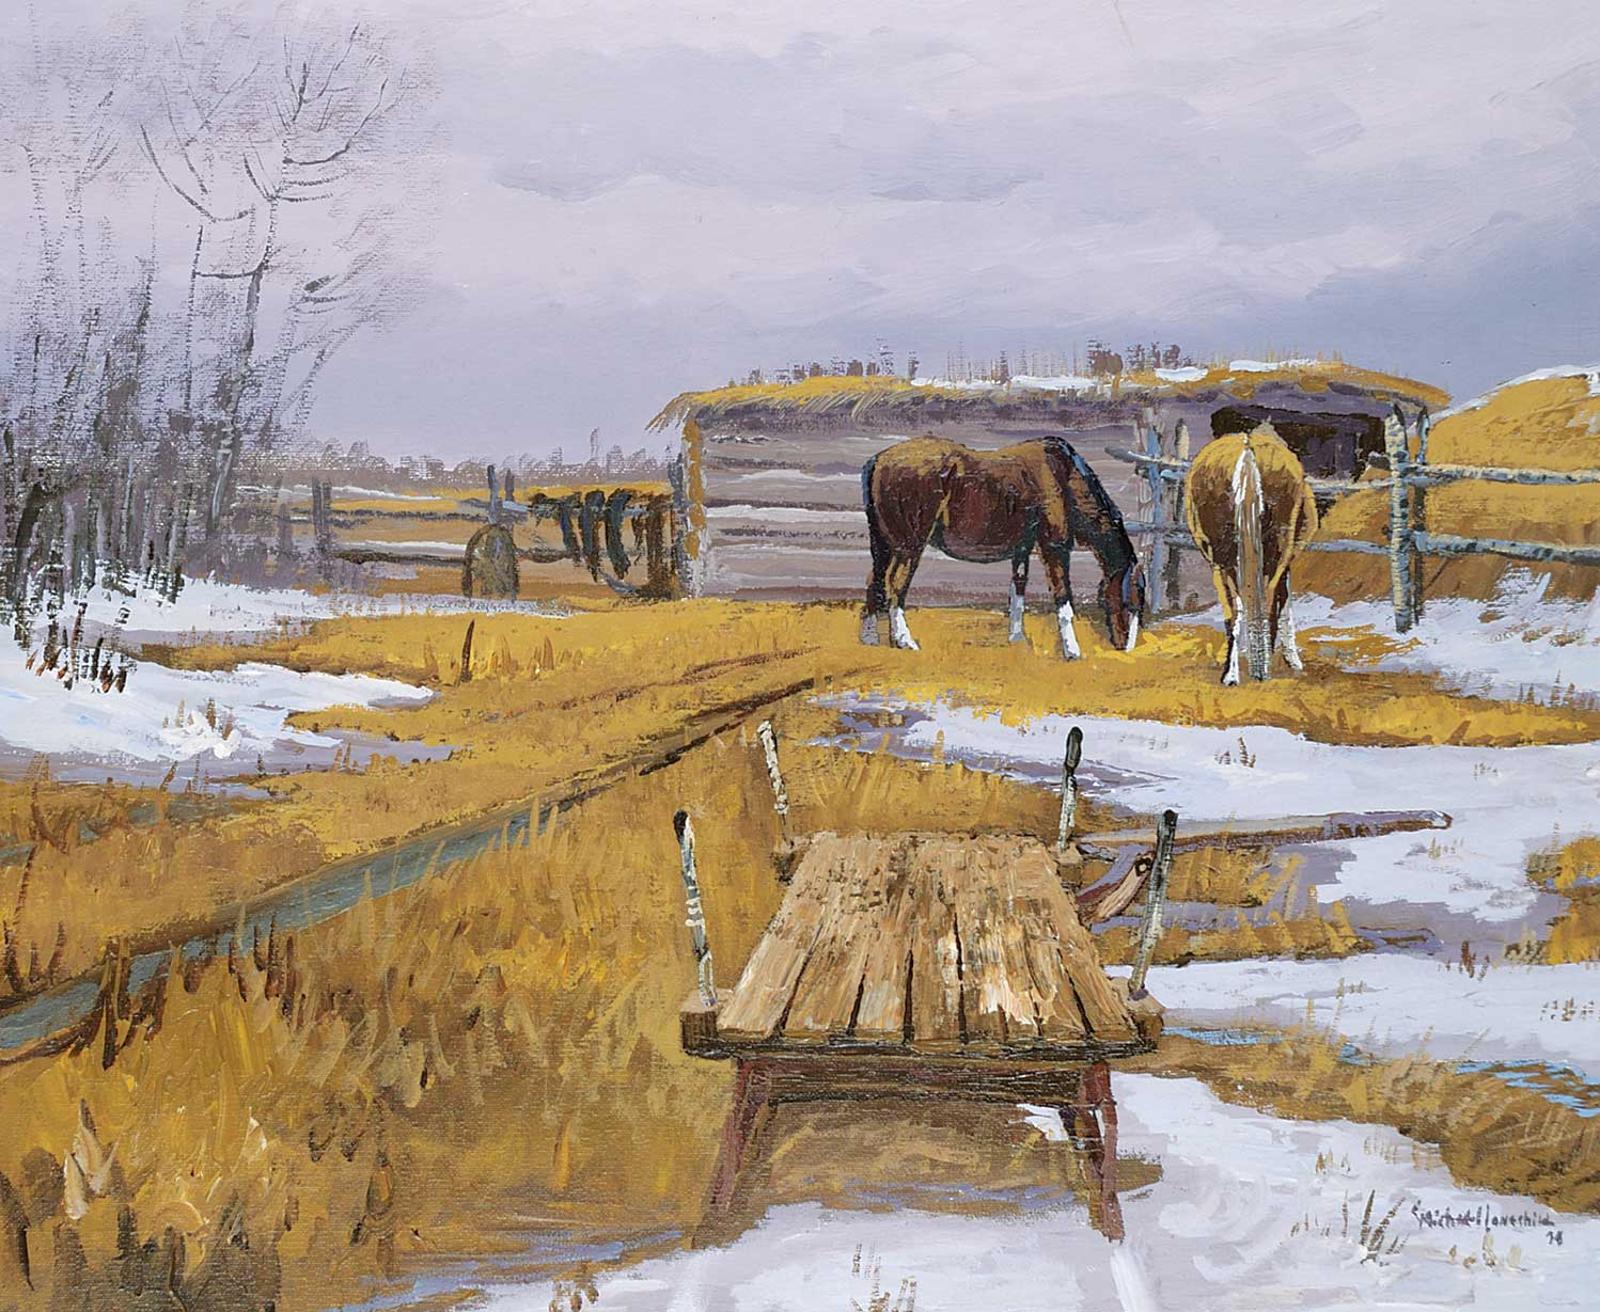 Michael Lonechild (1955) - Sled Finished for Season